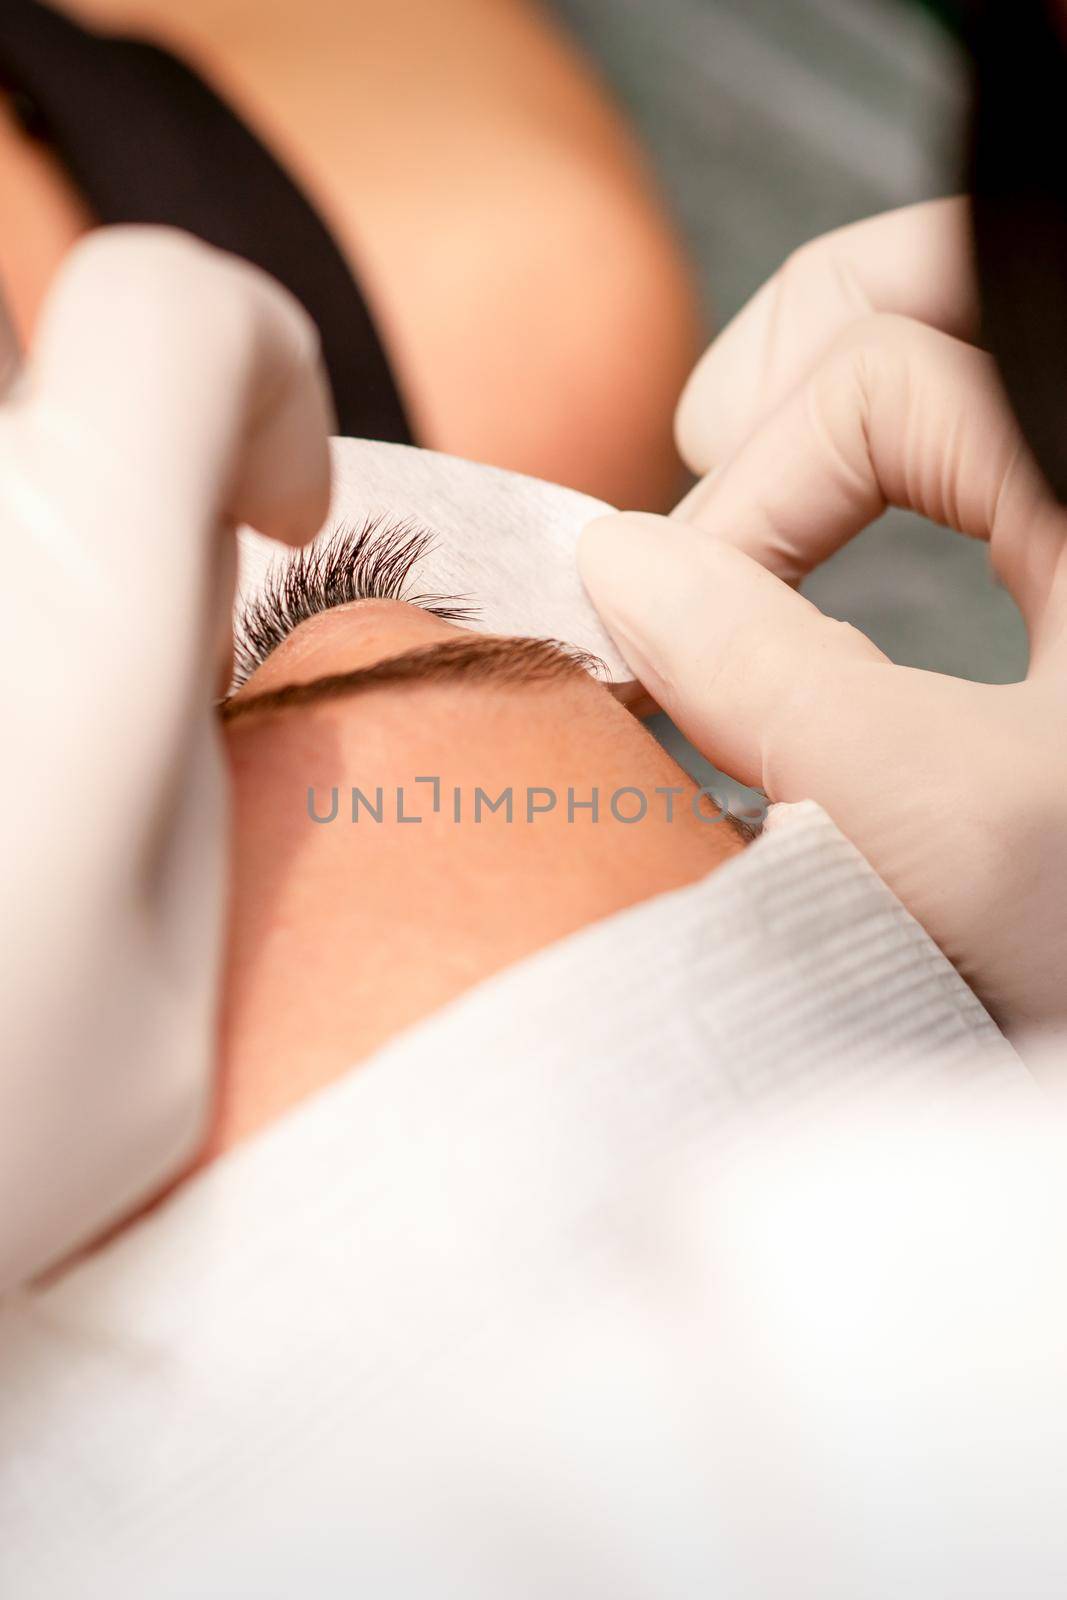 The hands of the cosmetologist are gluing white tape under the eye of the young caucasian woman during the eyelash extension procedure, closeup. by okskukuruza